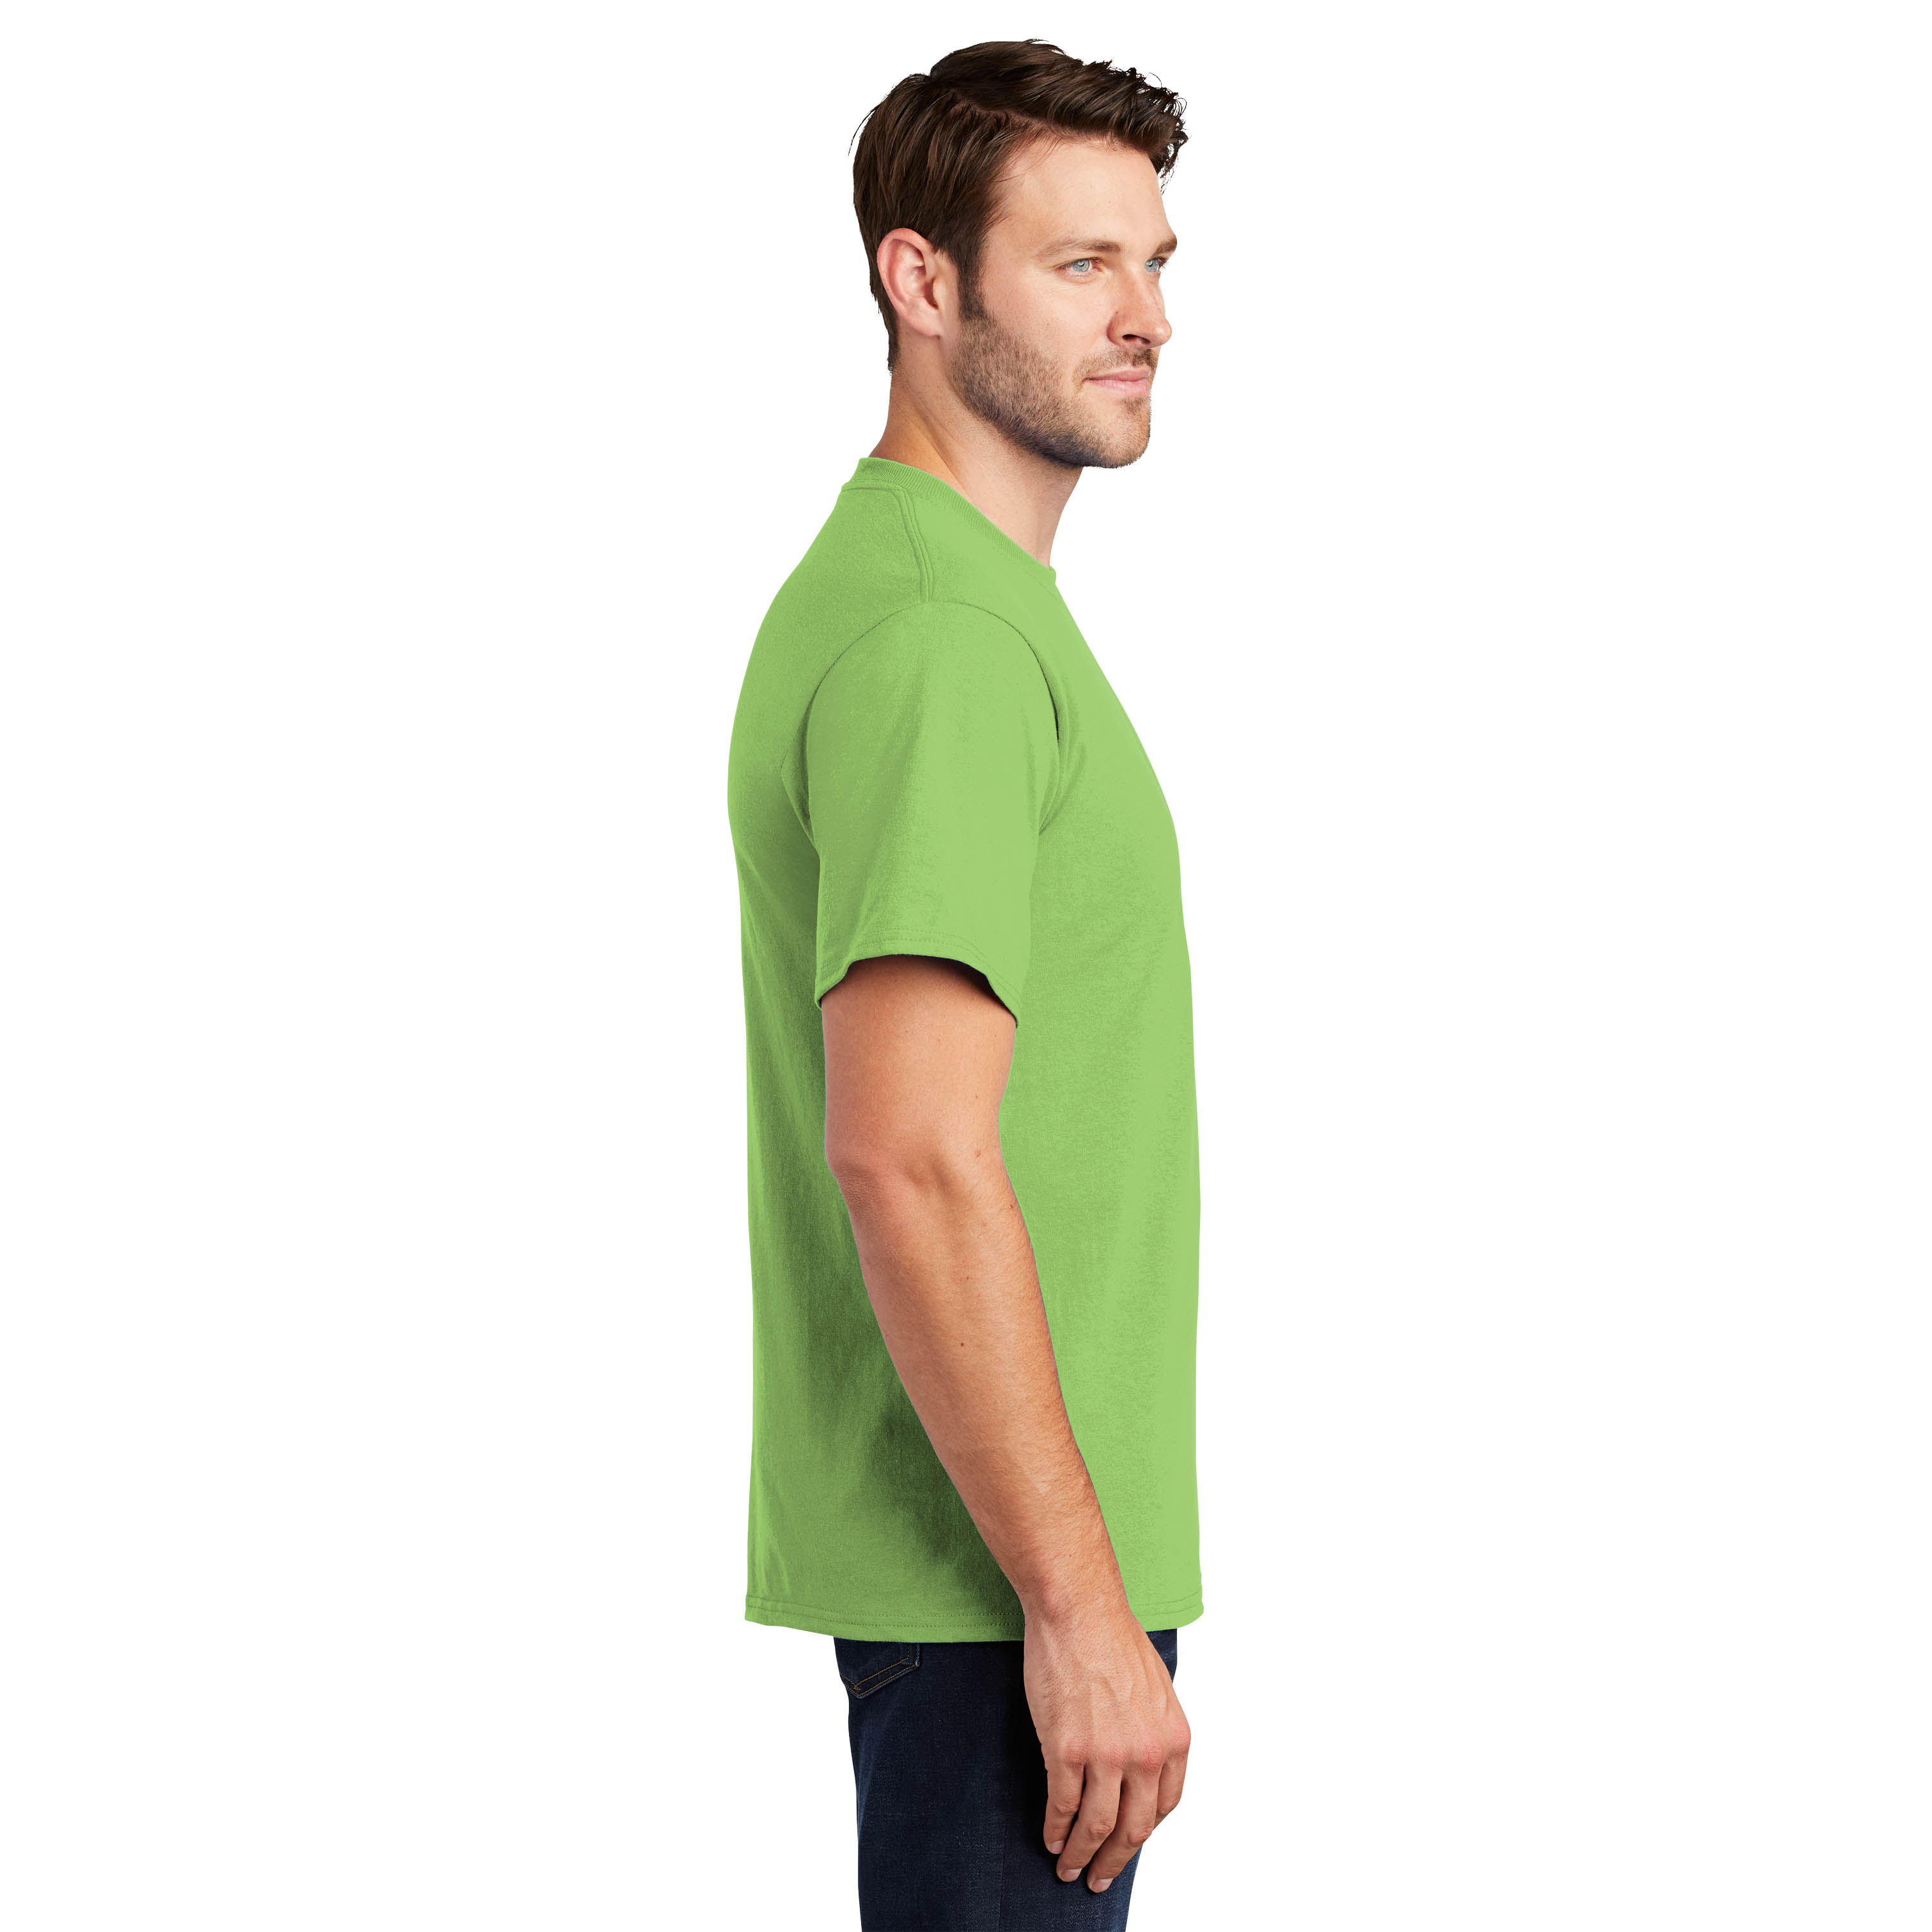 Port & Company PC61 Essential T-Shirt - Lime | Full Source